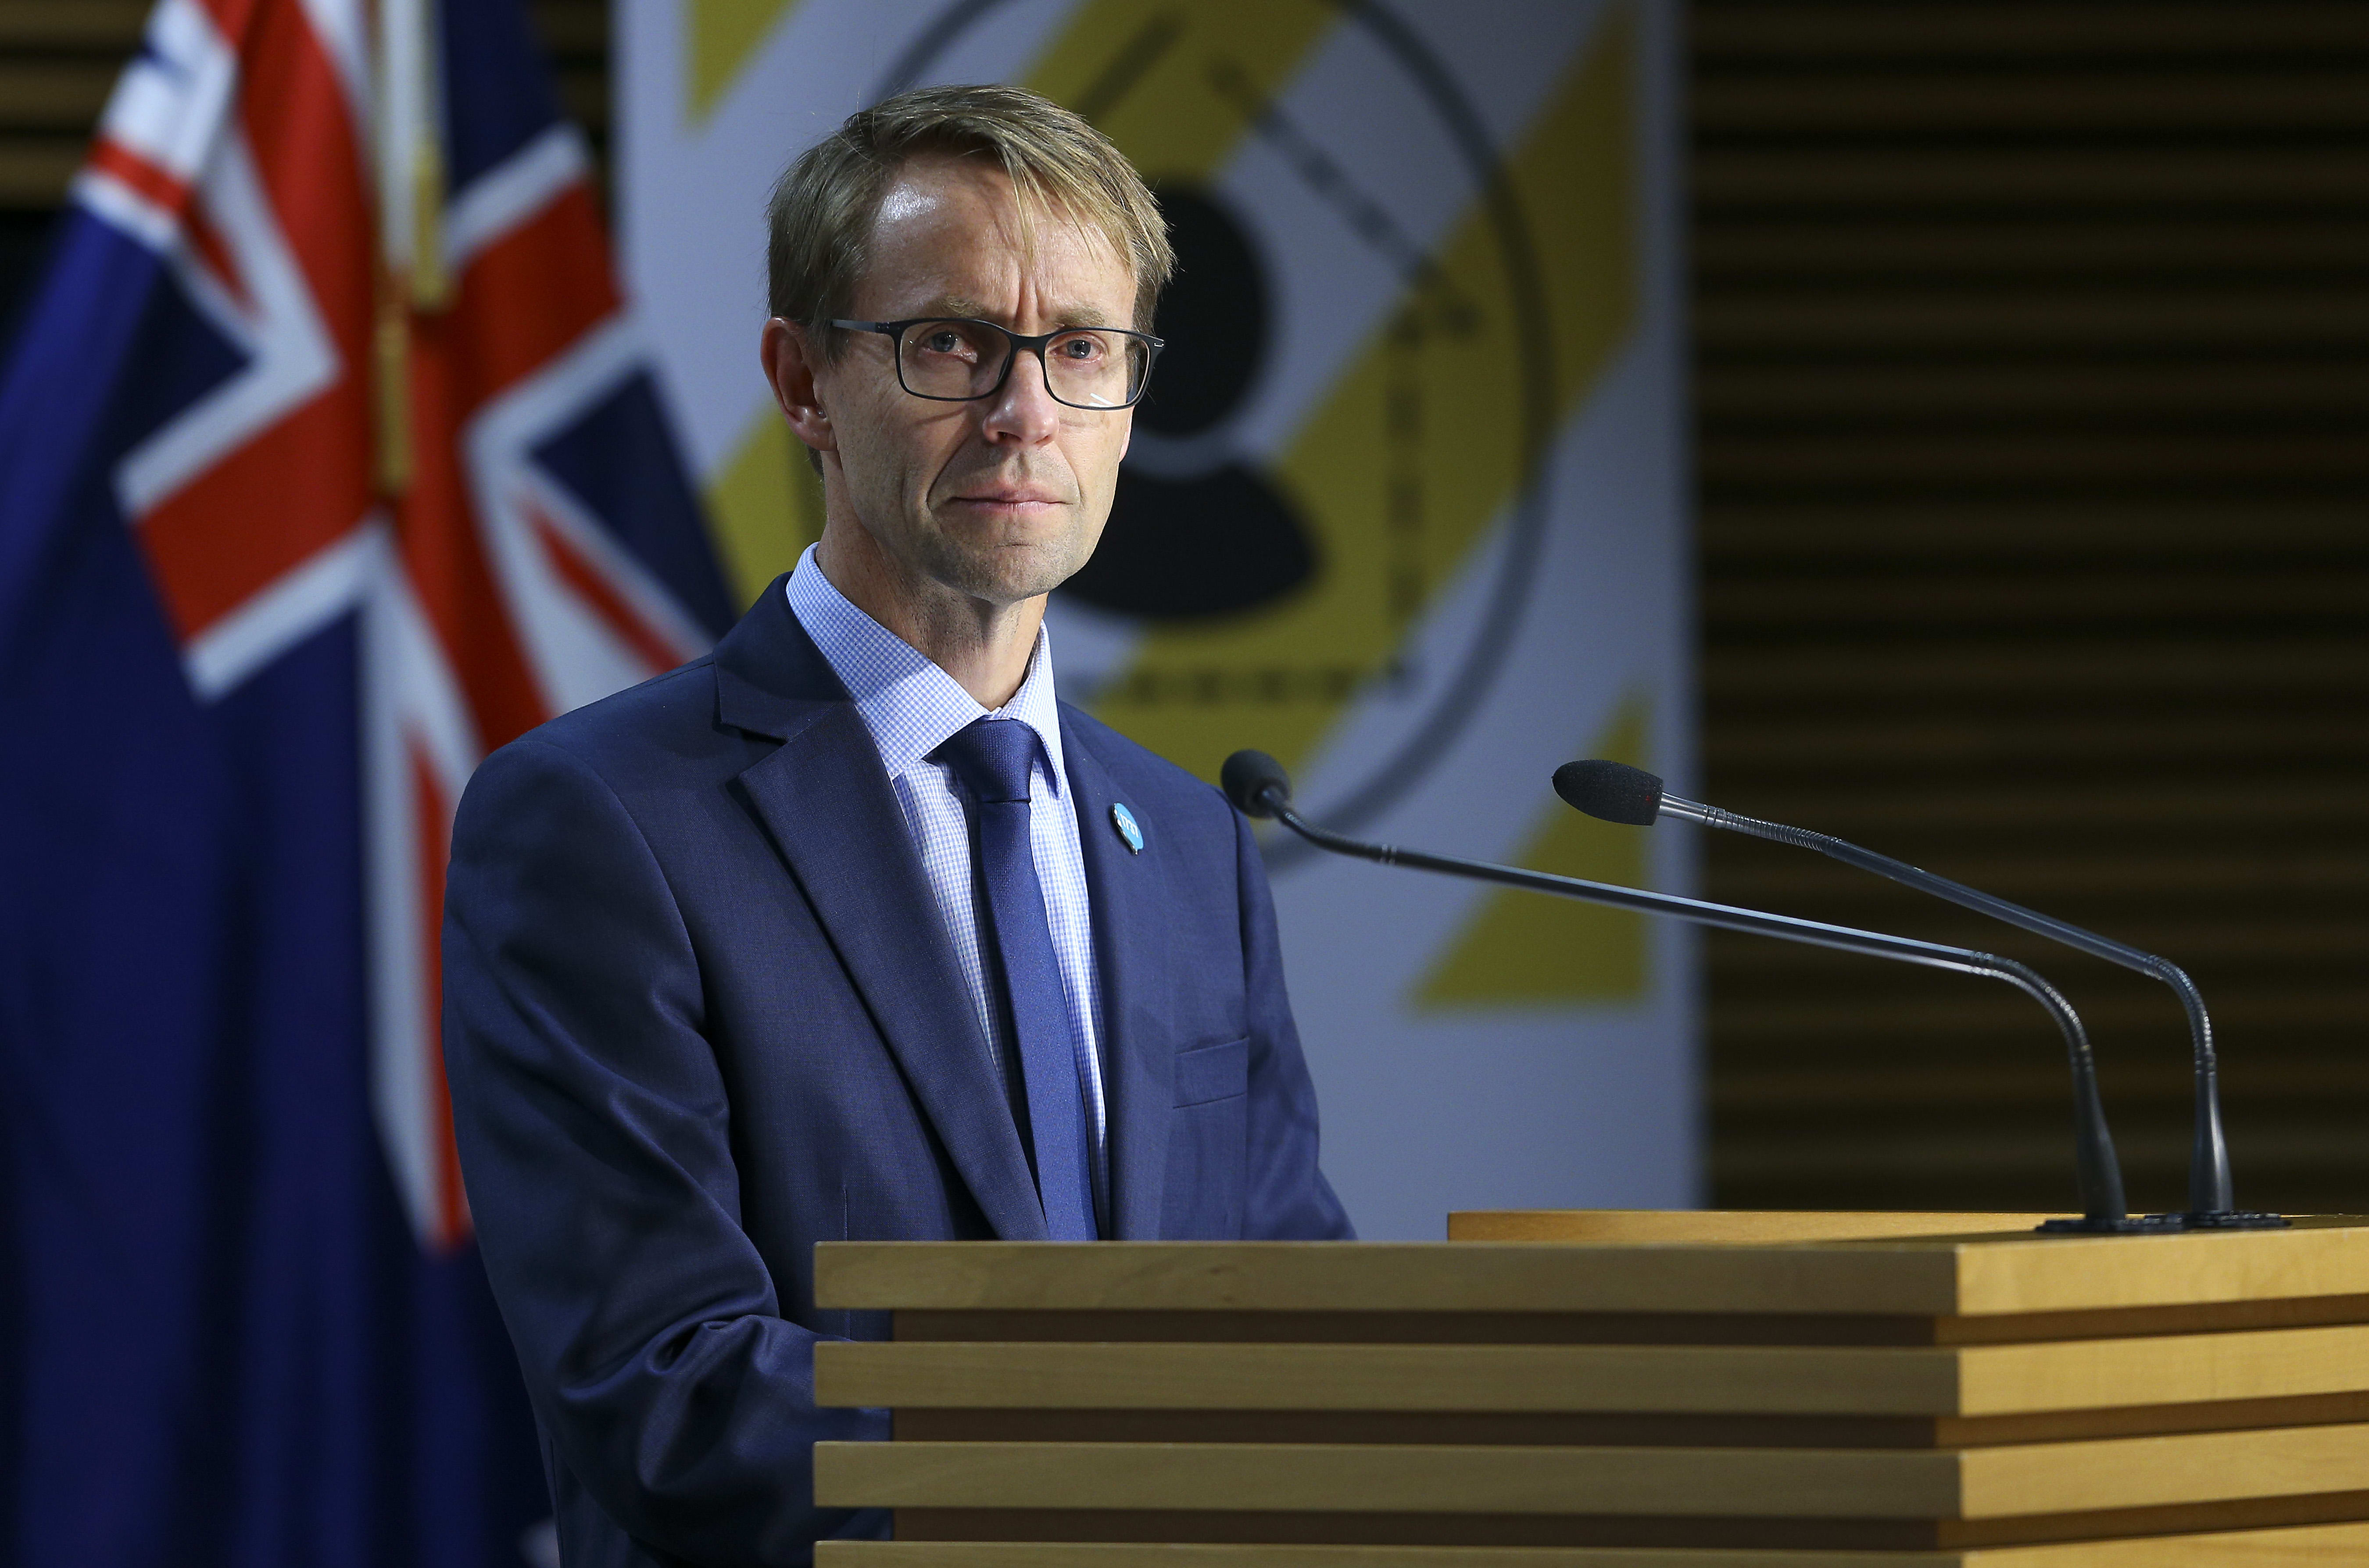 Director-General of Health Dr Ashley Bloomfield during a media conference at Parliament on April 16, 2020 in Wellington, New Zealand.